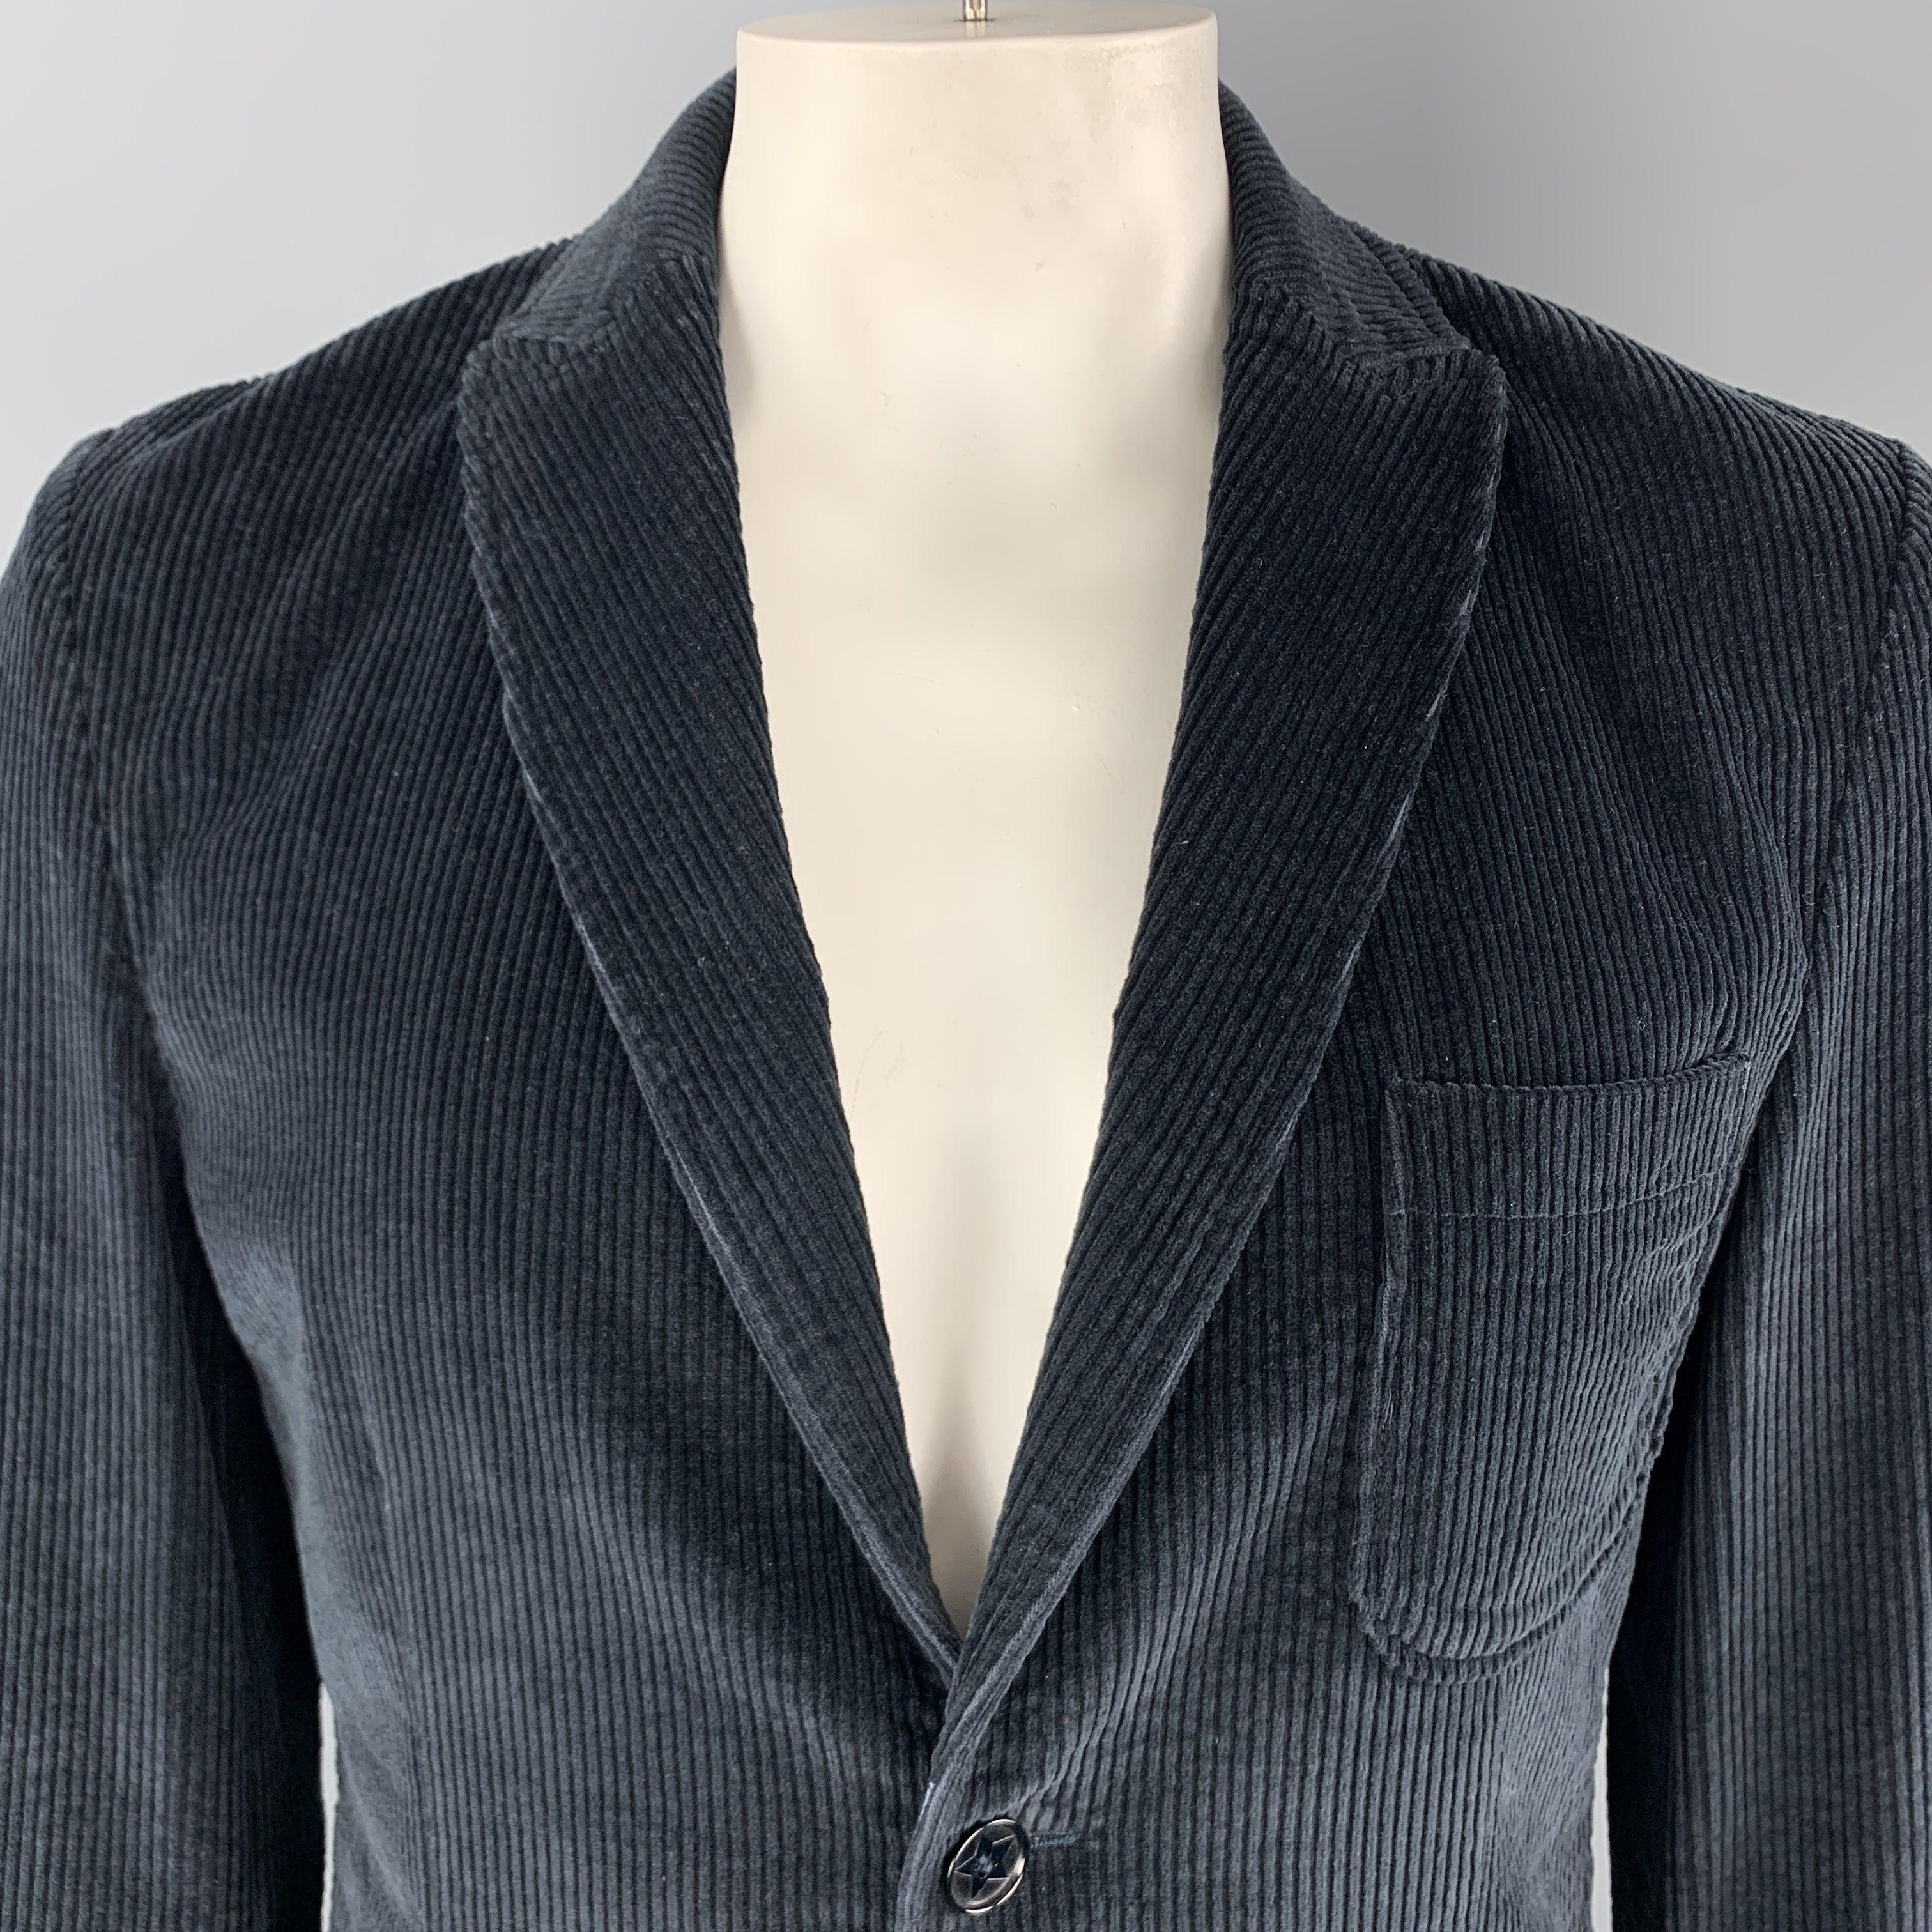 DANIELE ALESSANDRINI Sport Coat
comes in a navy corduroy material, with a peak lapel, patch and slit pockets, two buttons at closure, single breasted, unbuttoned cuffs and a single vent at back. Made in Italy.
Excellent Pre-Owned Condition.